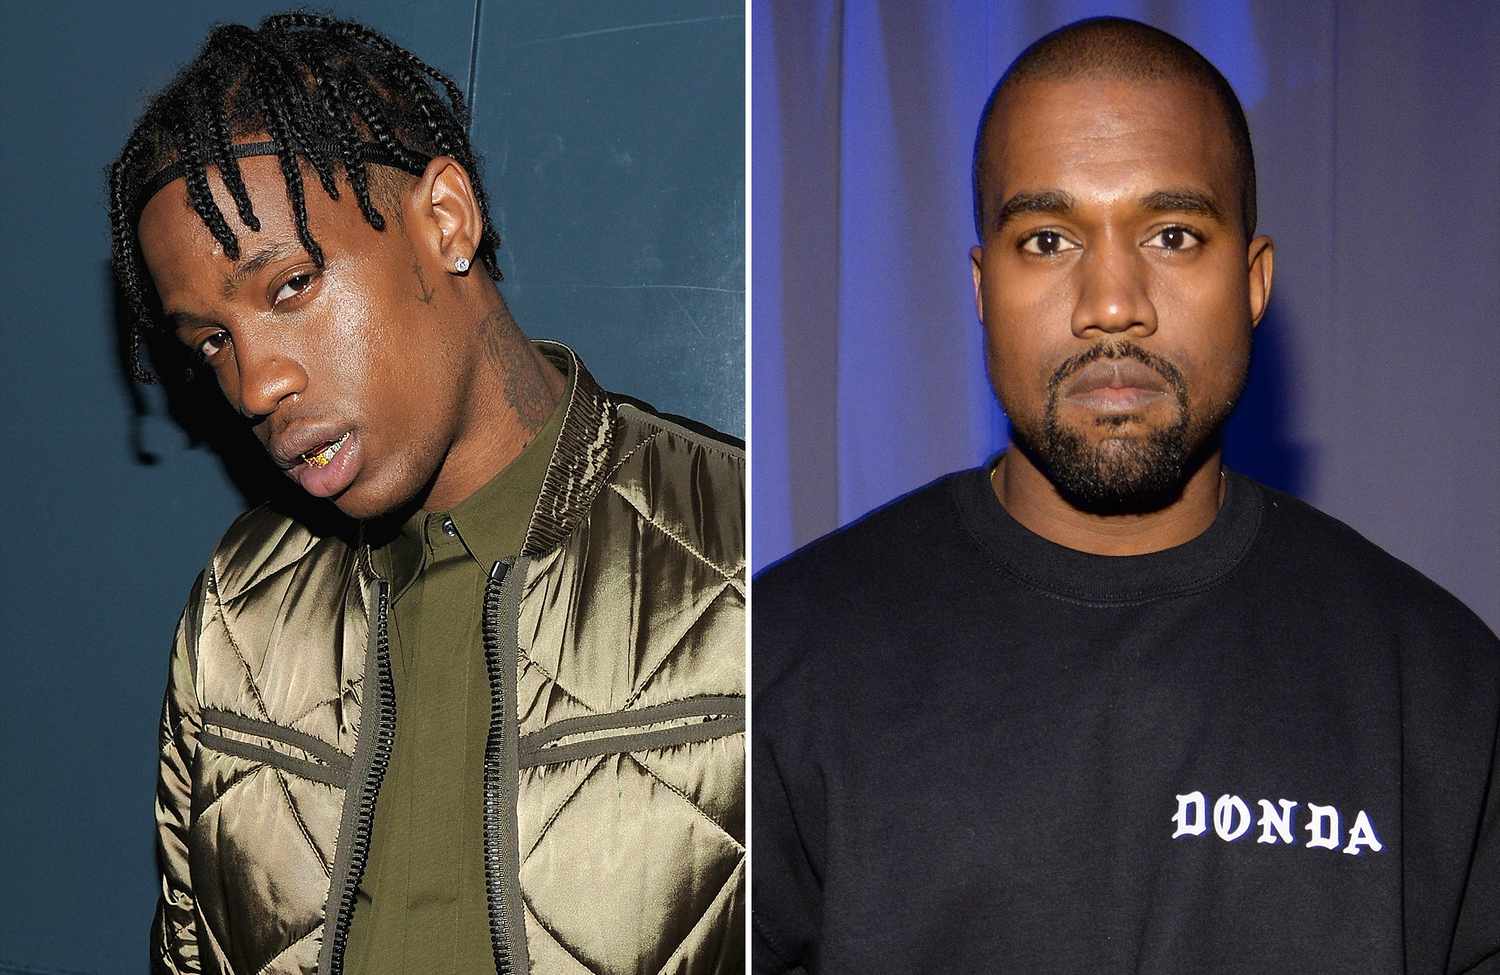 Kanye West And Travis Scott Rehearsing For Potential Joint Performance At Orlando Concert